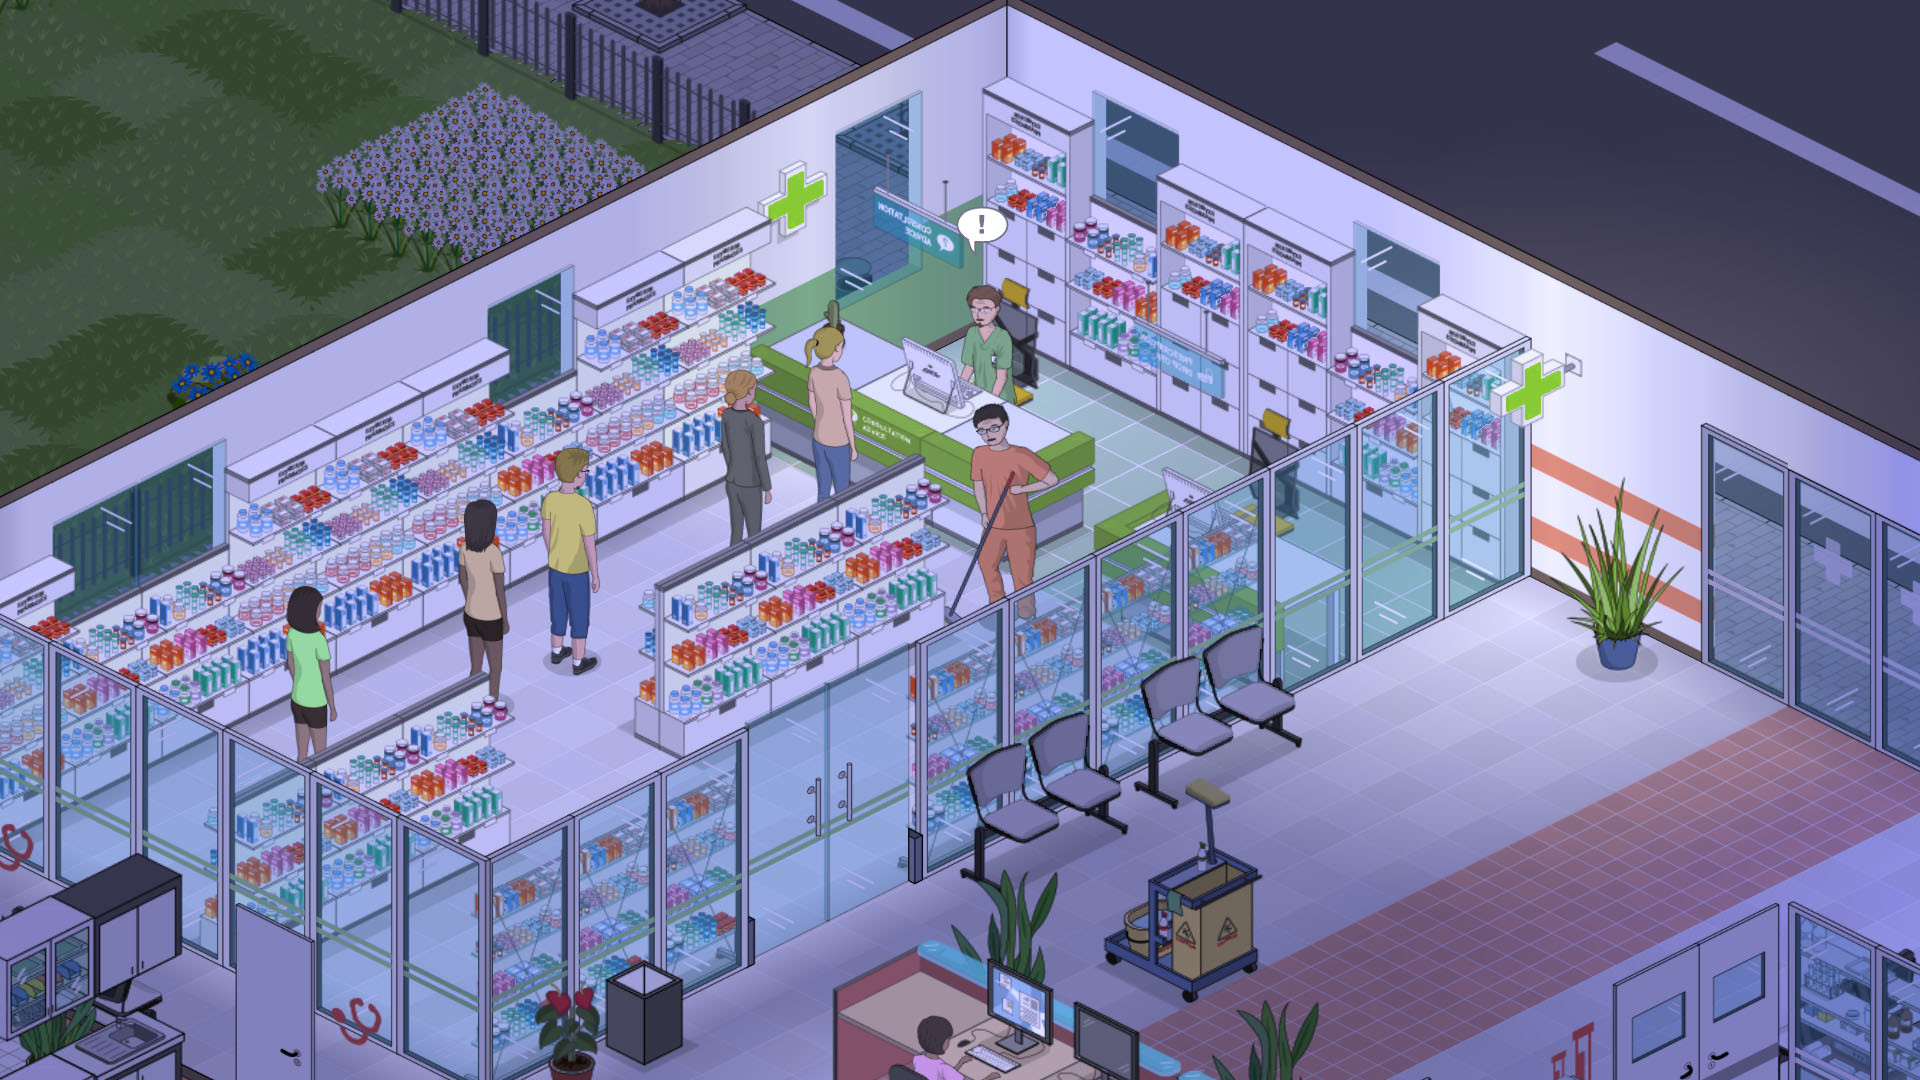 Project Hospital - Hospital Services Featured Screenshot #1